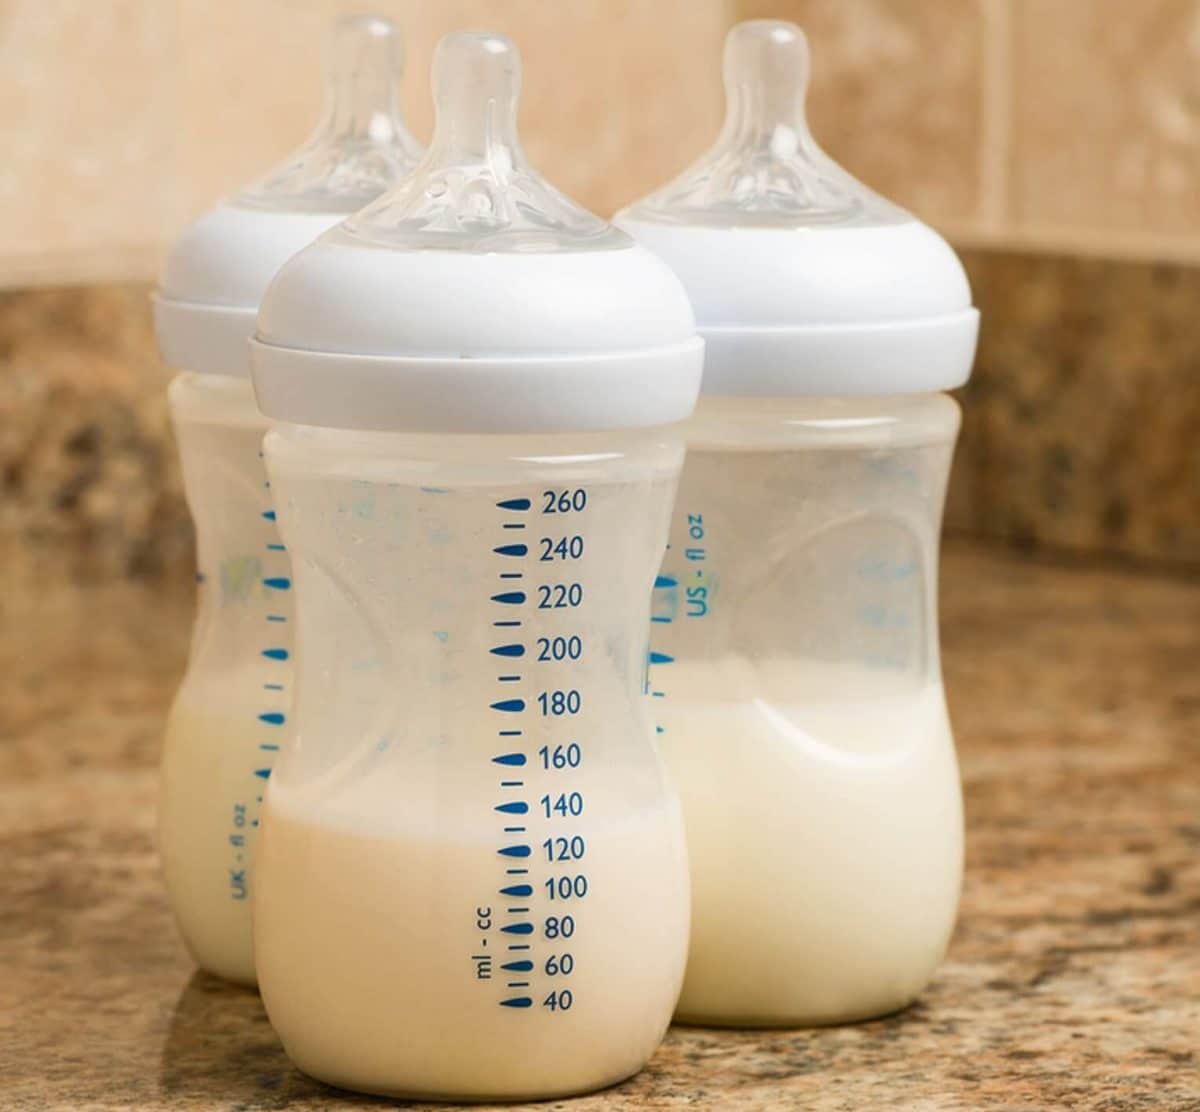 The 10 Best Baby Formulas to Buy 2020